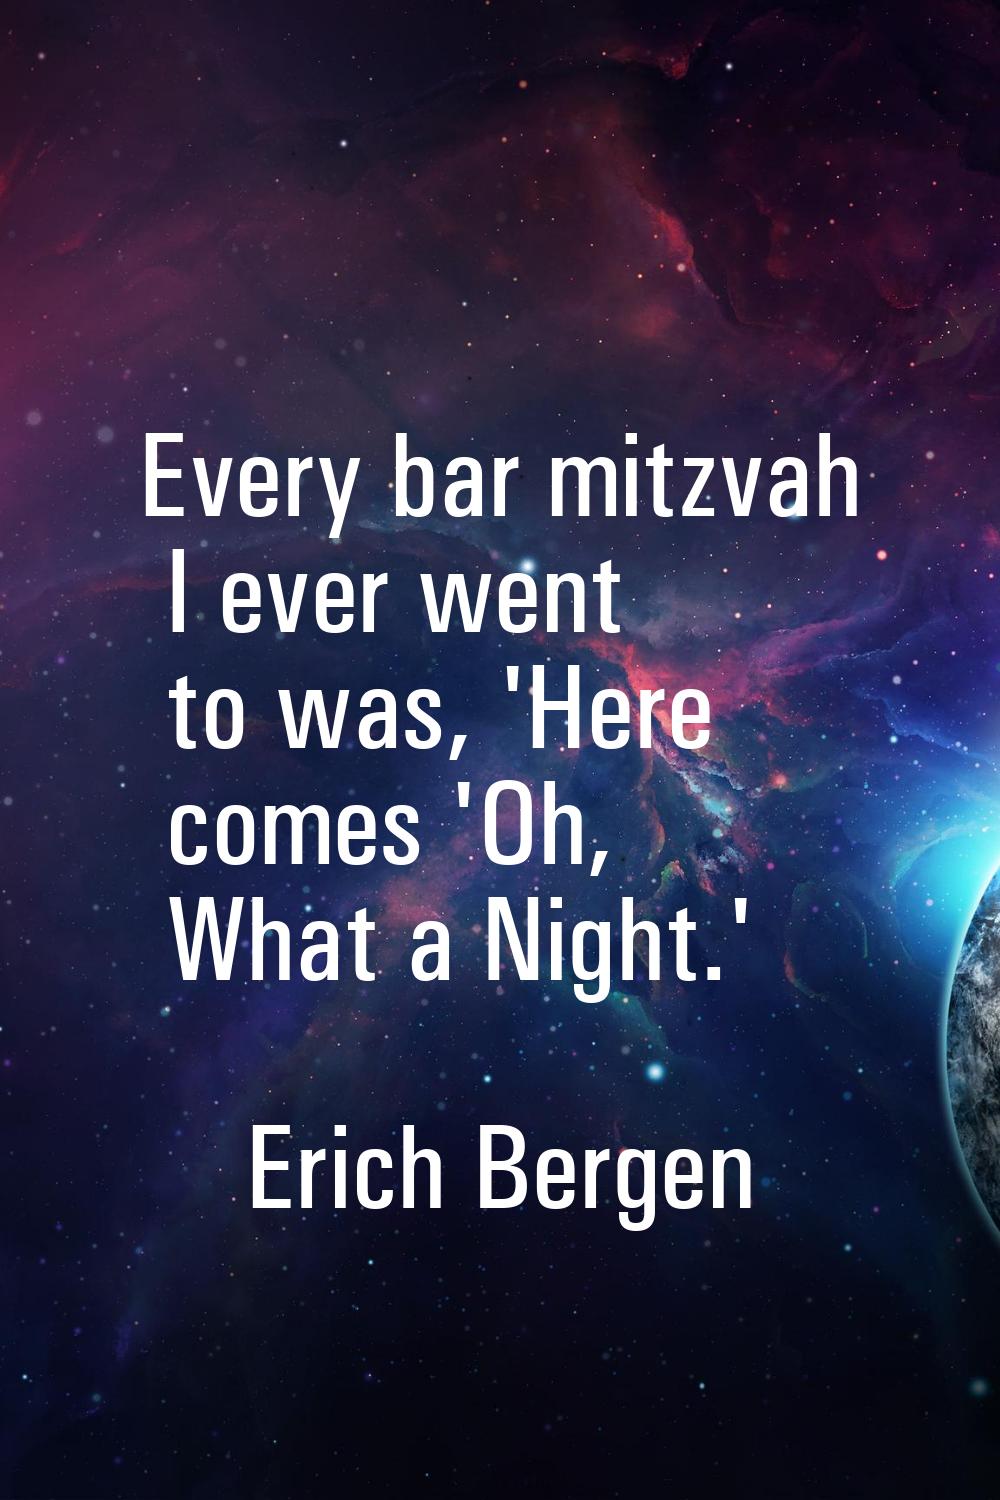 Every bar mitzvah I ever went to was, 'Here comes 'Oh, What a Night.'